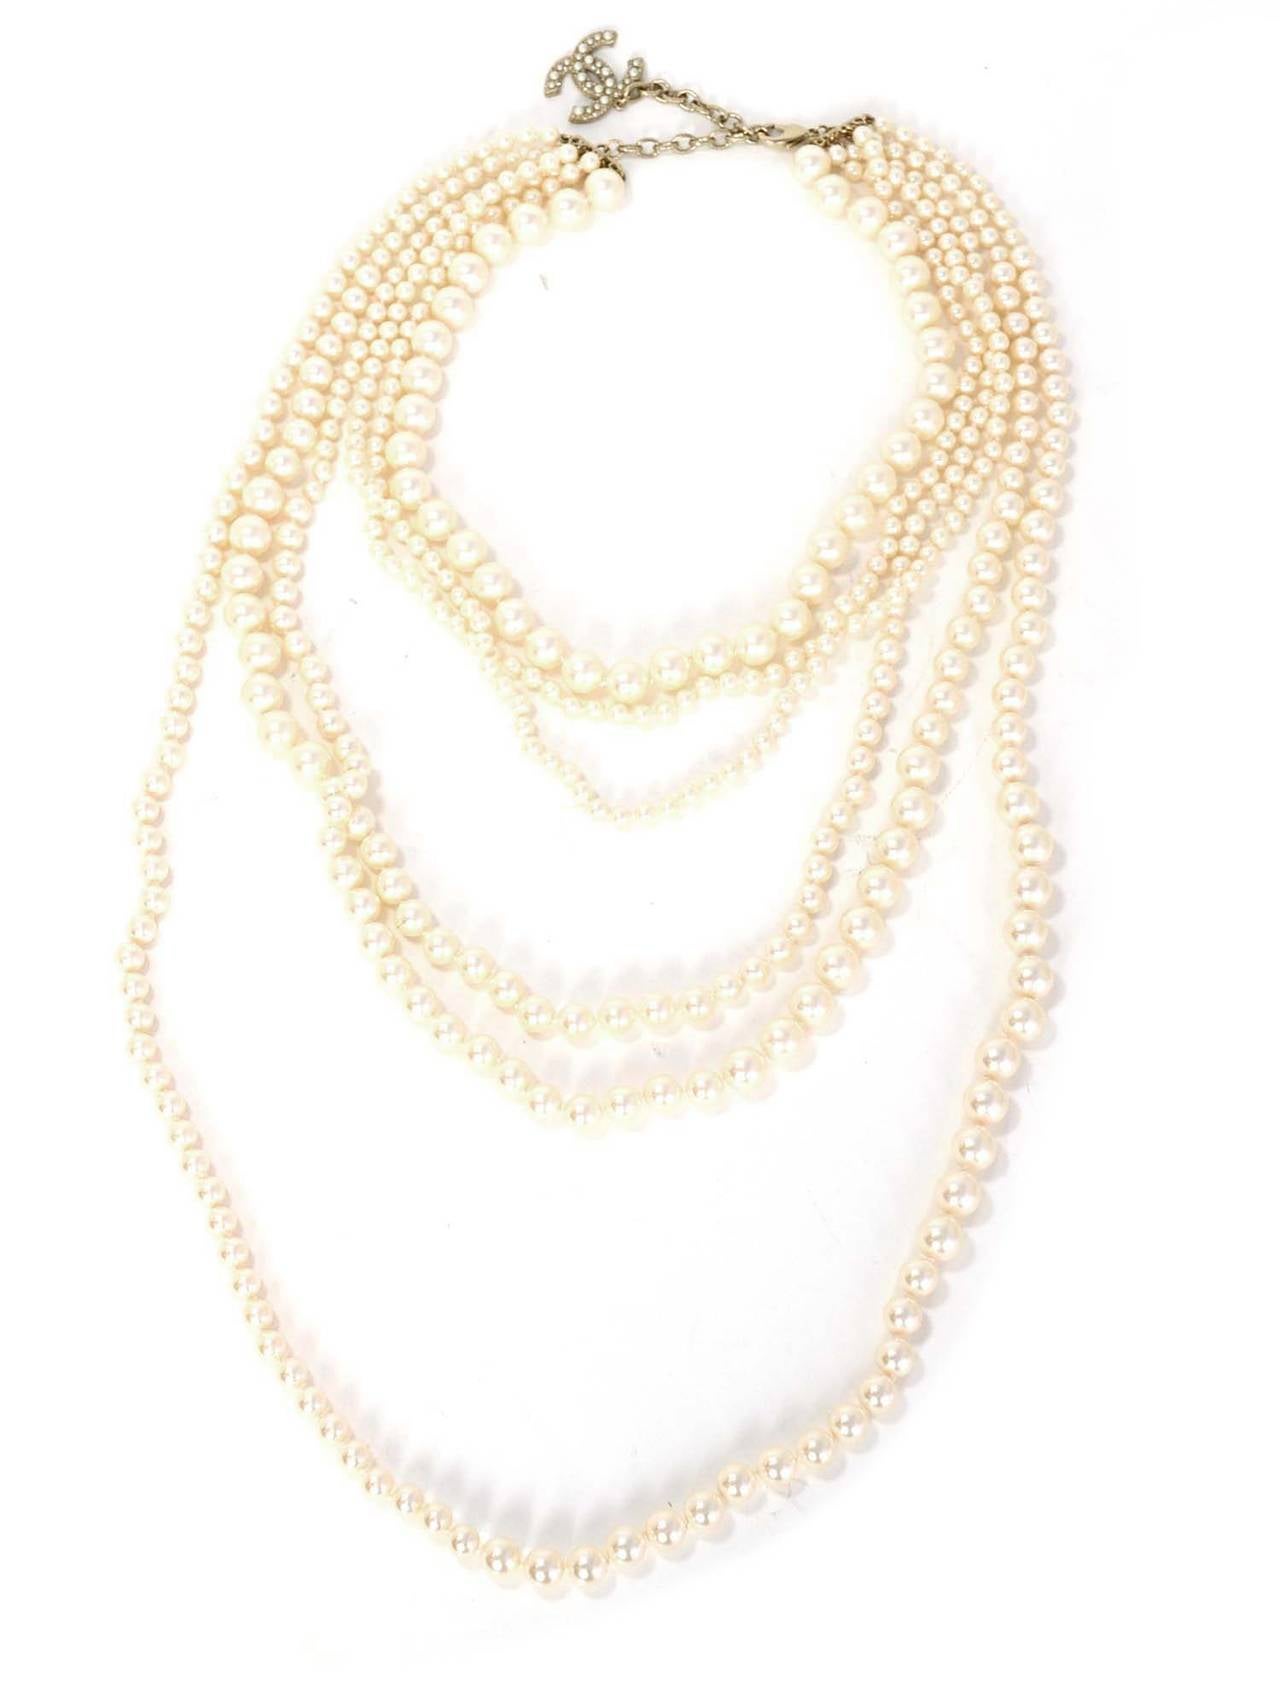 CHANEL 6 Strand Faux Pearl Infinity Necklace NIB RT $3,675

    Made in: France
    Year of Production: 2014
    Stamp: CHANEL A14 C Made in France
    Closure: Lobster claps
    Color: Pearl
    Materials: Faux Pearl
    Overall Condition: